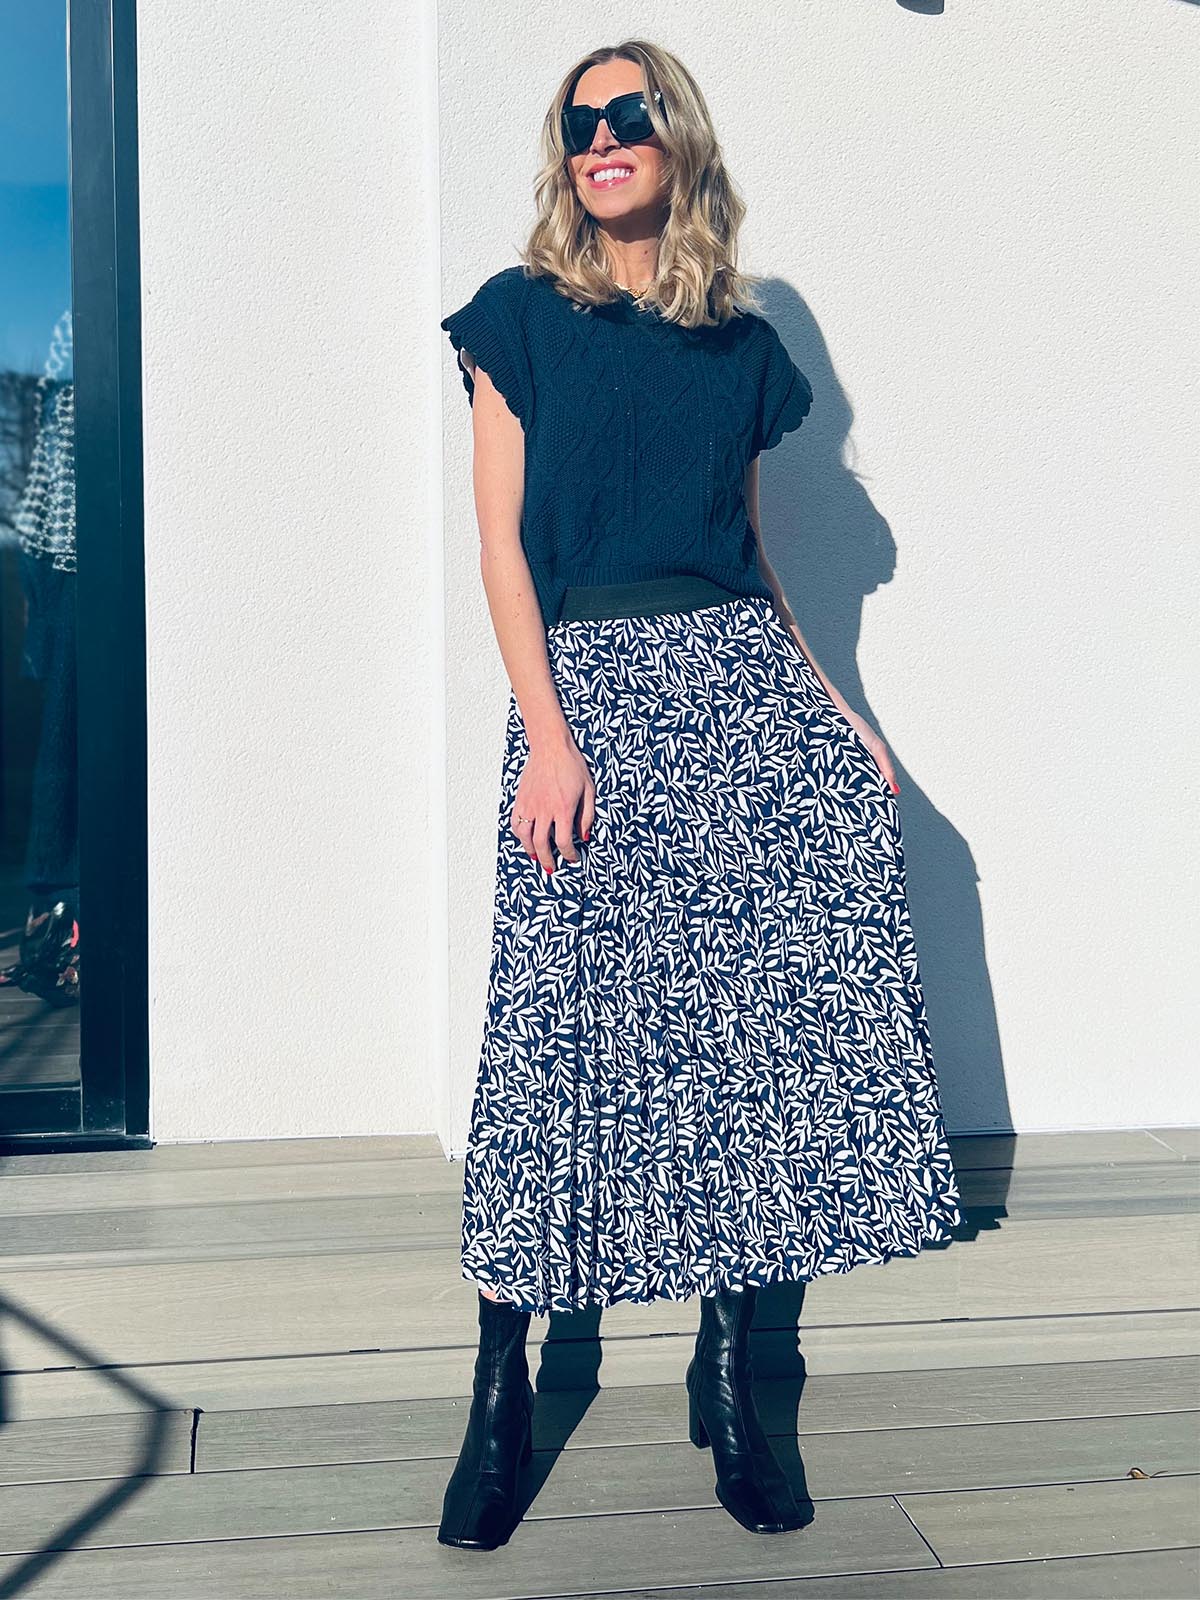 A model wearing the pleated Gill skirt in navy with a short sleeve t-shirt, pictured wearing sunglasses on a balcony on a sunny day.